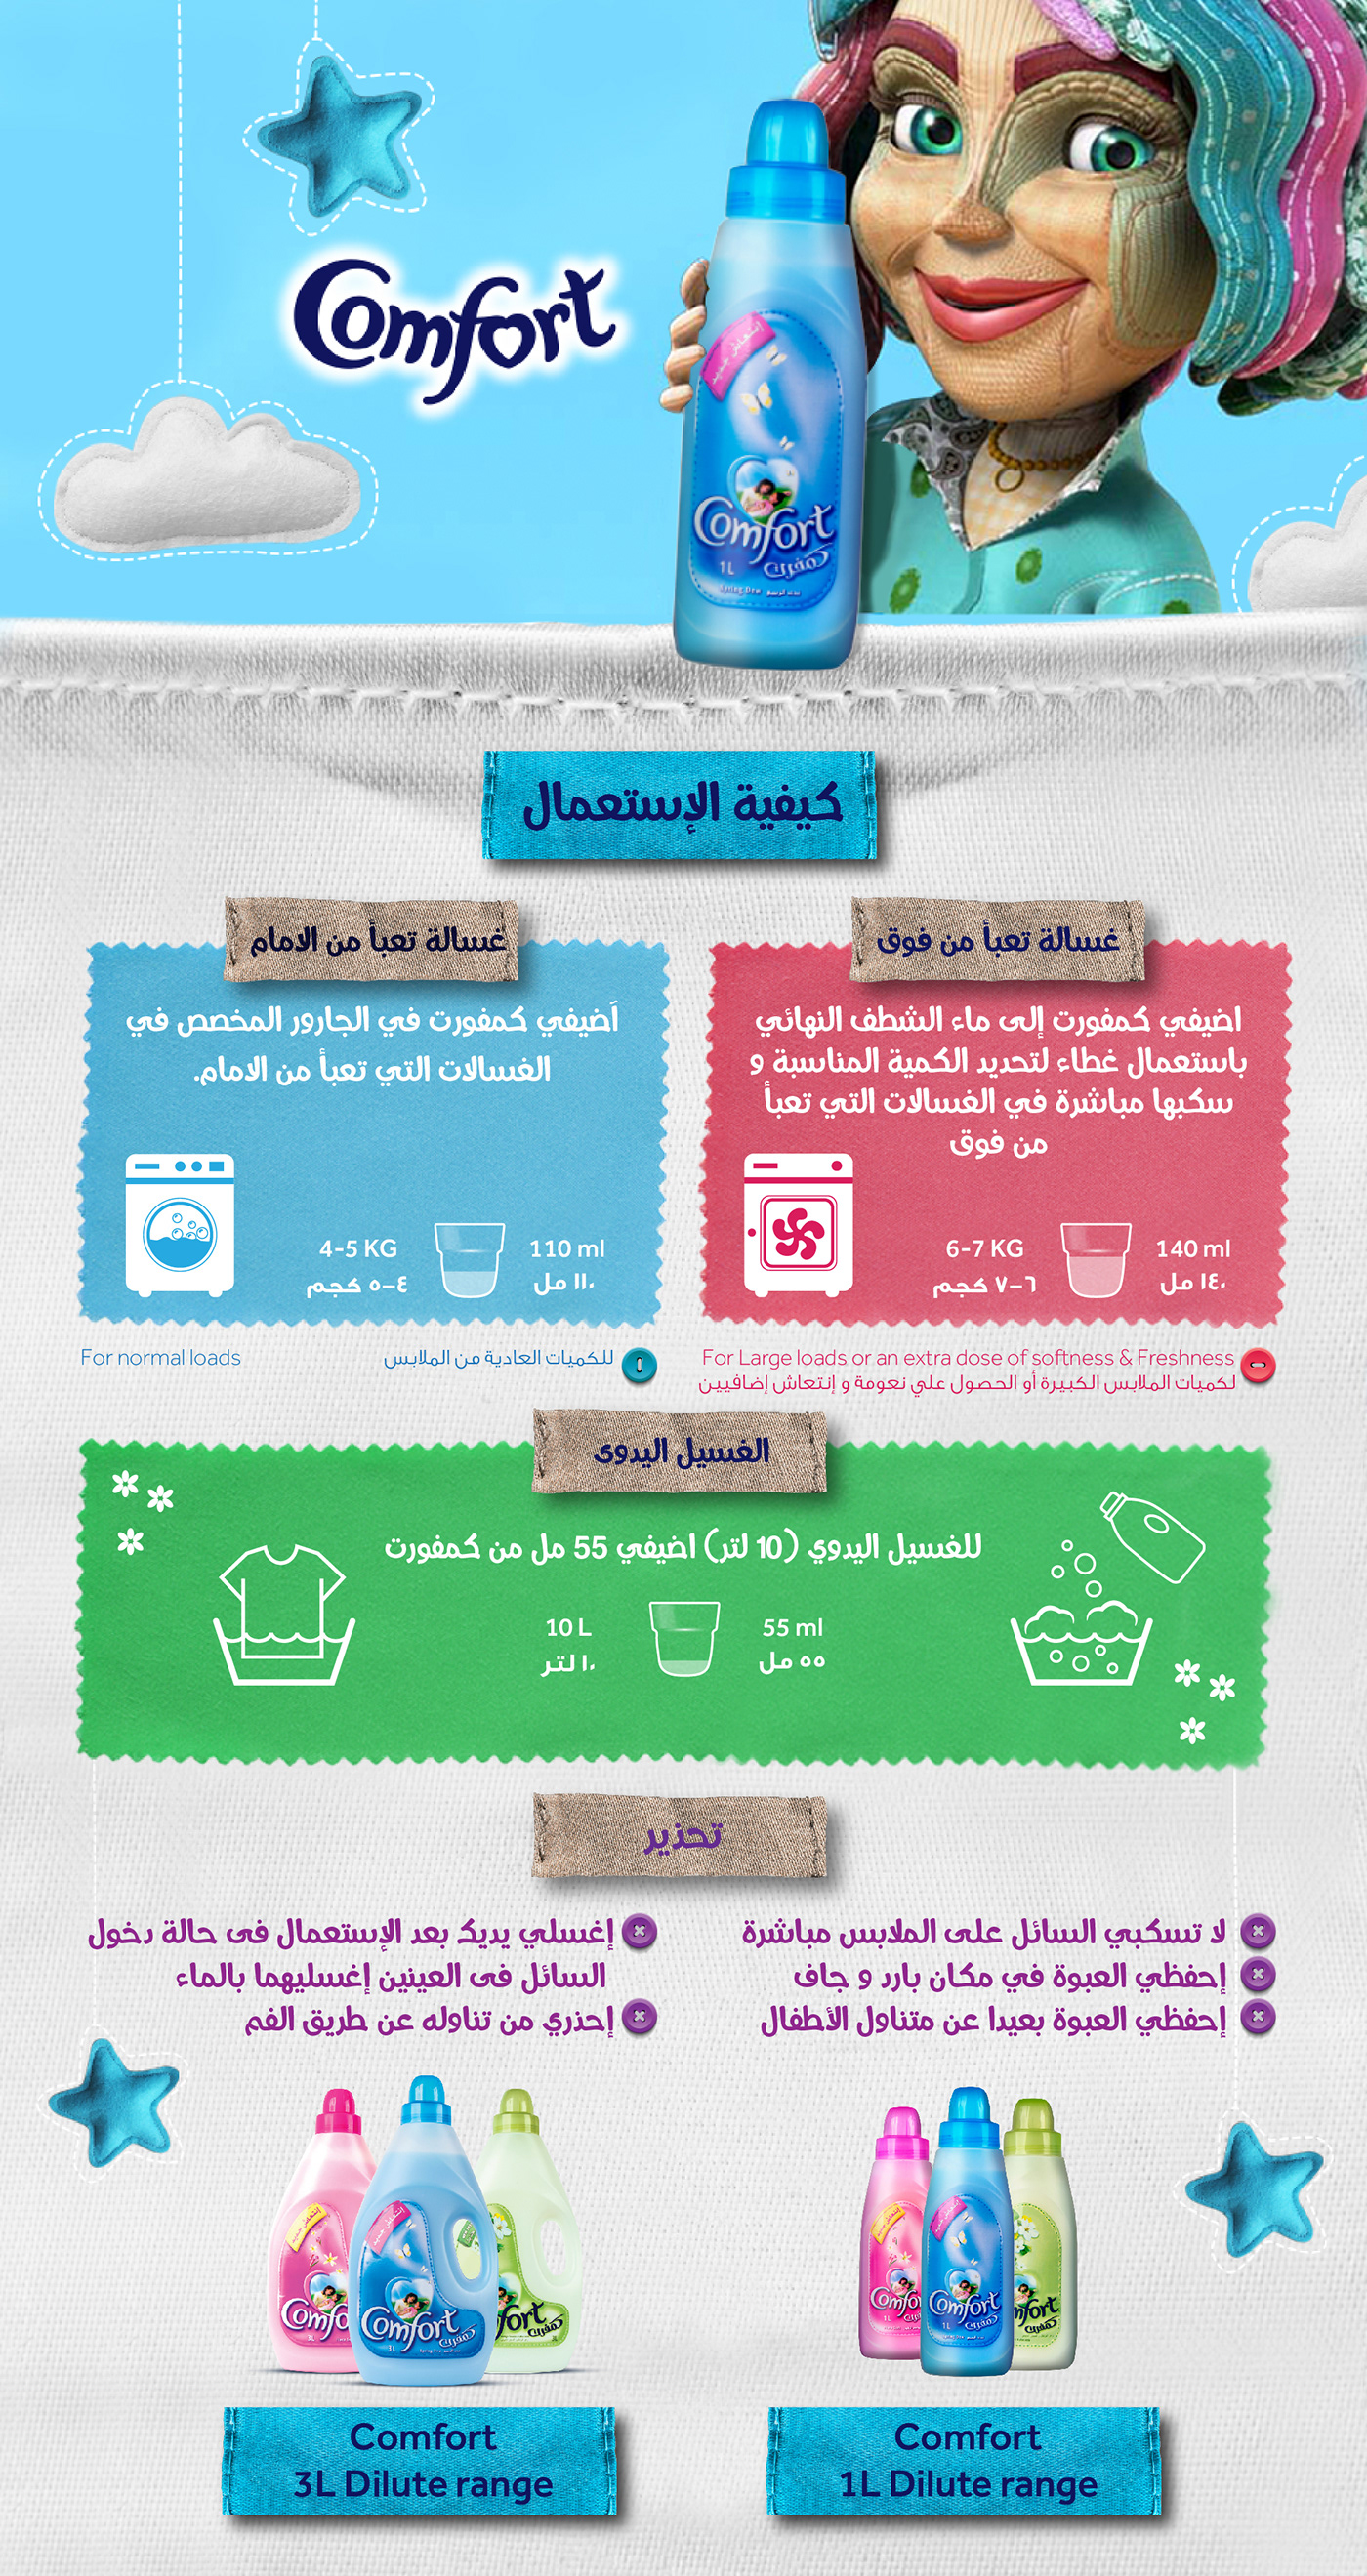 Facebook social media tab for comfort Unilever Middle East showing instructions how to clean clothes